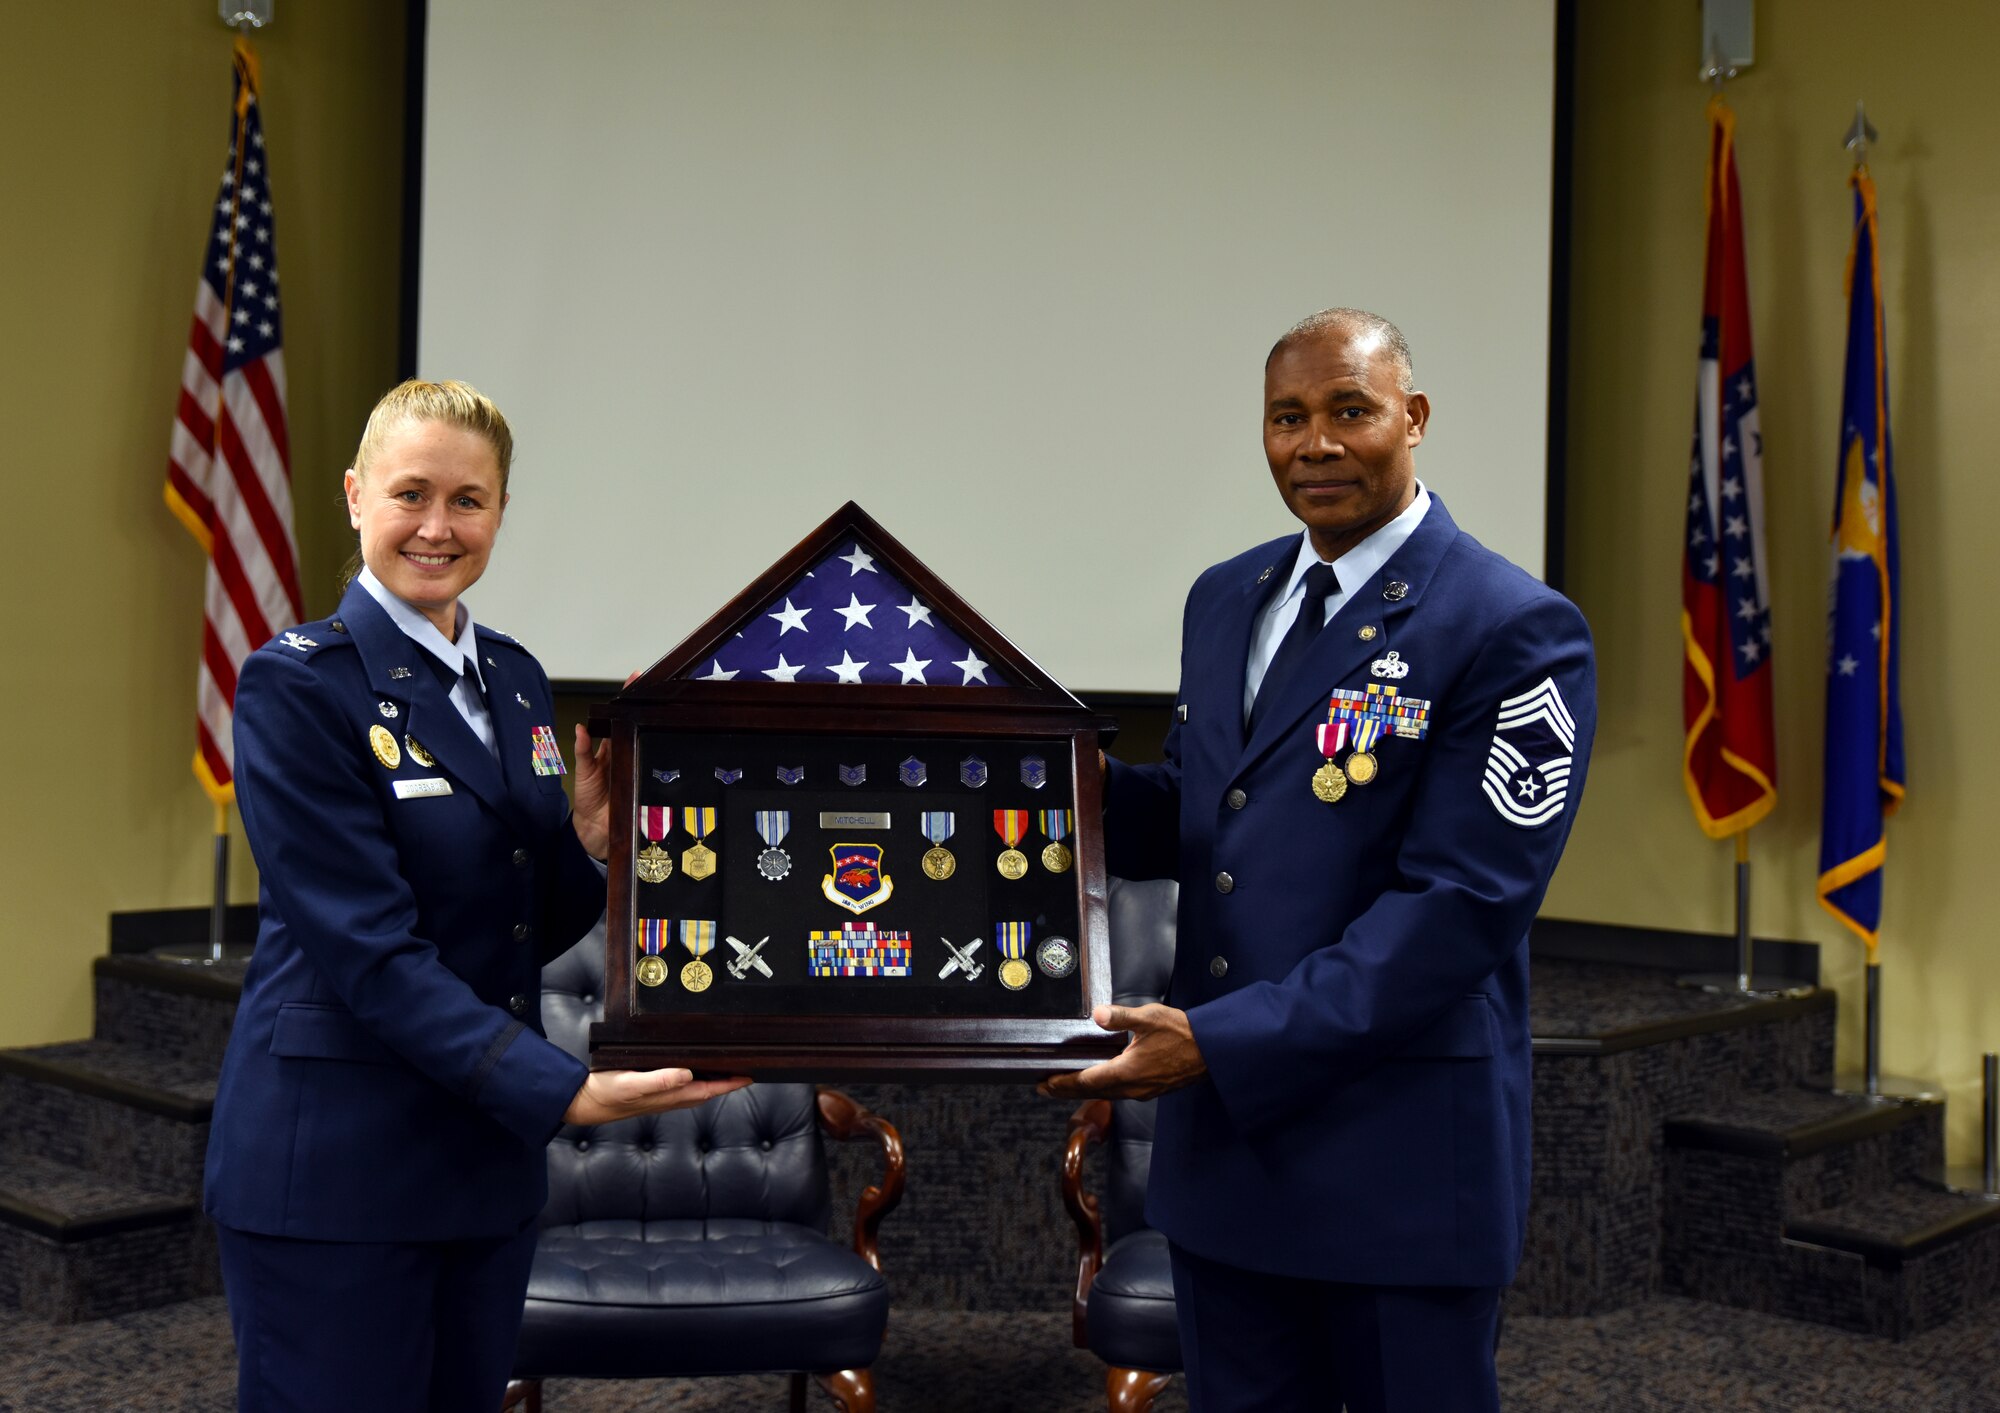 Chief Master Sgt. Kerry Mitchell, 188th Wing human resource advisor, receives a shadowbox Jan. 10, 2016, from Col. Bobbi Doorenbos, 188th Wing commander, during his retirement ceremony at Ebbing Air National Guard Base, Fort Smith, Ark. Mitchell served in the Air National Guard for more than 31 years and previously worked as the first sergeant for the 188th Maintenance Squadron and as the supervisor of the 188th non-destructive inspection shop before becoming the wing human resource advisor. (U.S. Air National Guard photo by Senior Airman Cody Martin/Released)